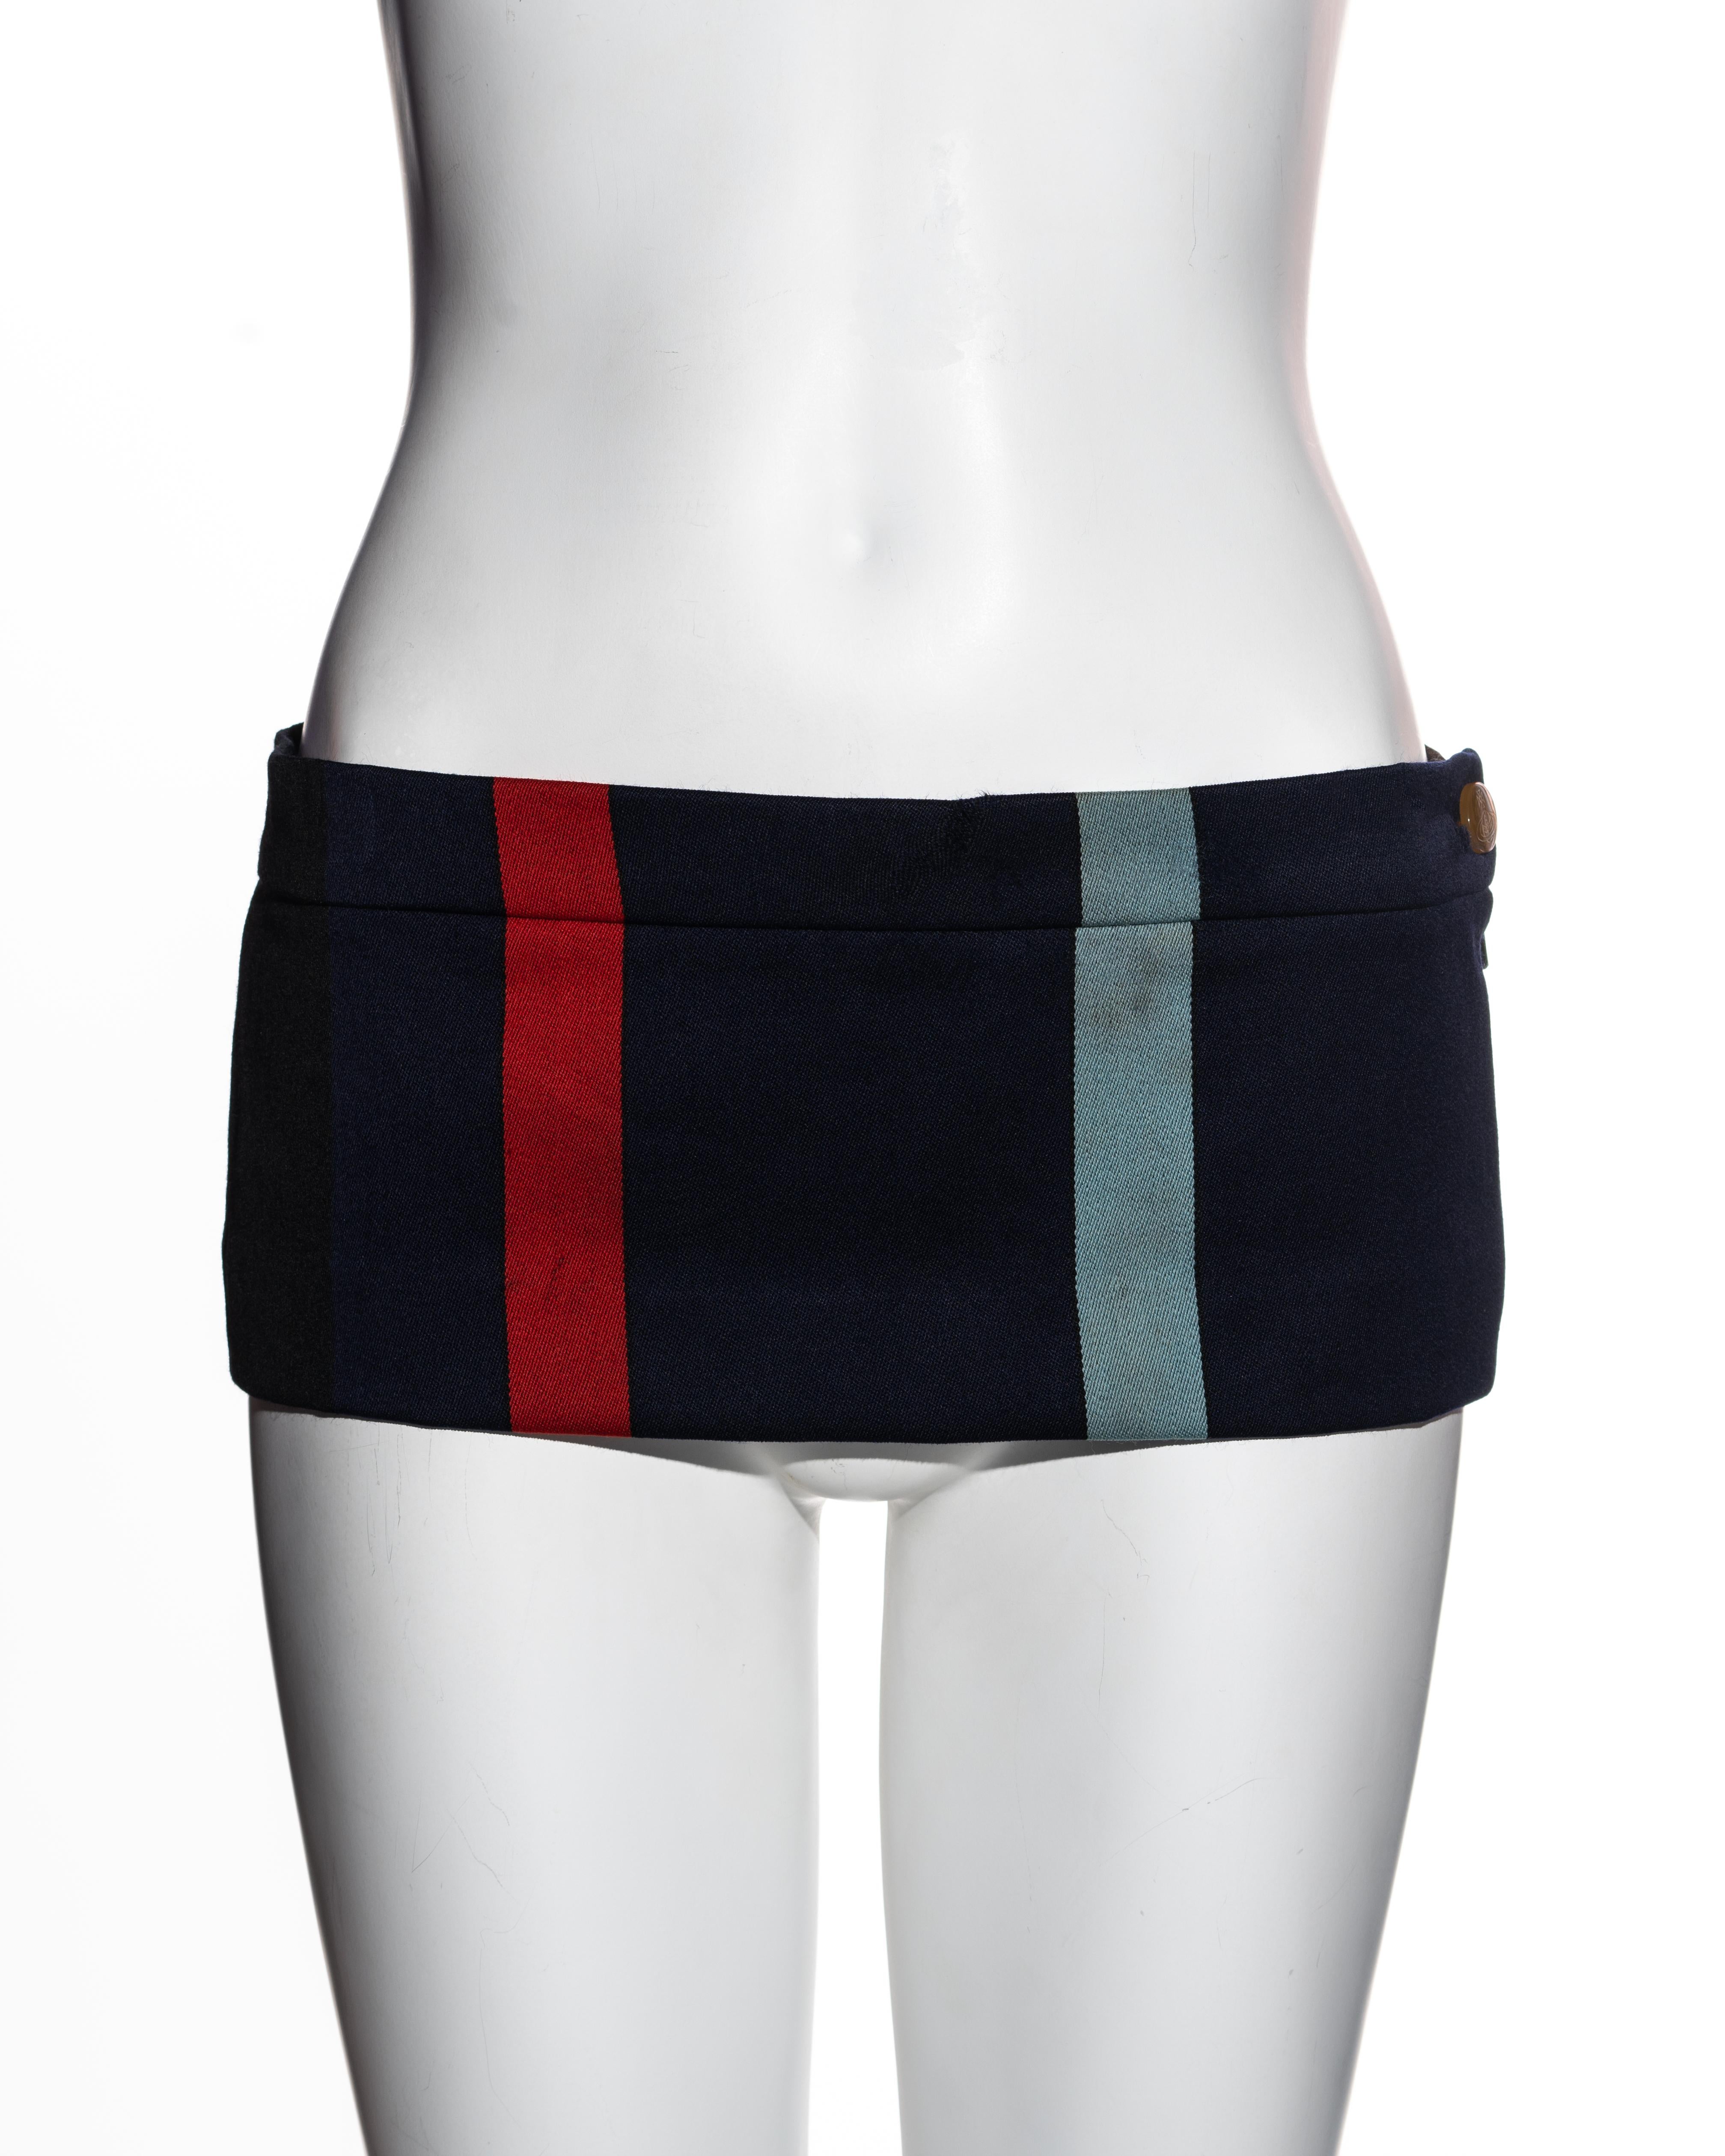 ▪ Vivienne Westwood striped wool micro mini skirt 
▪ Red, navy, black, brown, white and sky blue stripes
▪ Length: 16 cm / 6.3 inch
▪ Orb etched button 
▪ Concealed zipper at side seam 
▪ Back vent 
▪ An iconic design worn on the runway by Kate Moss